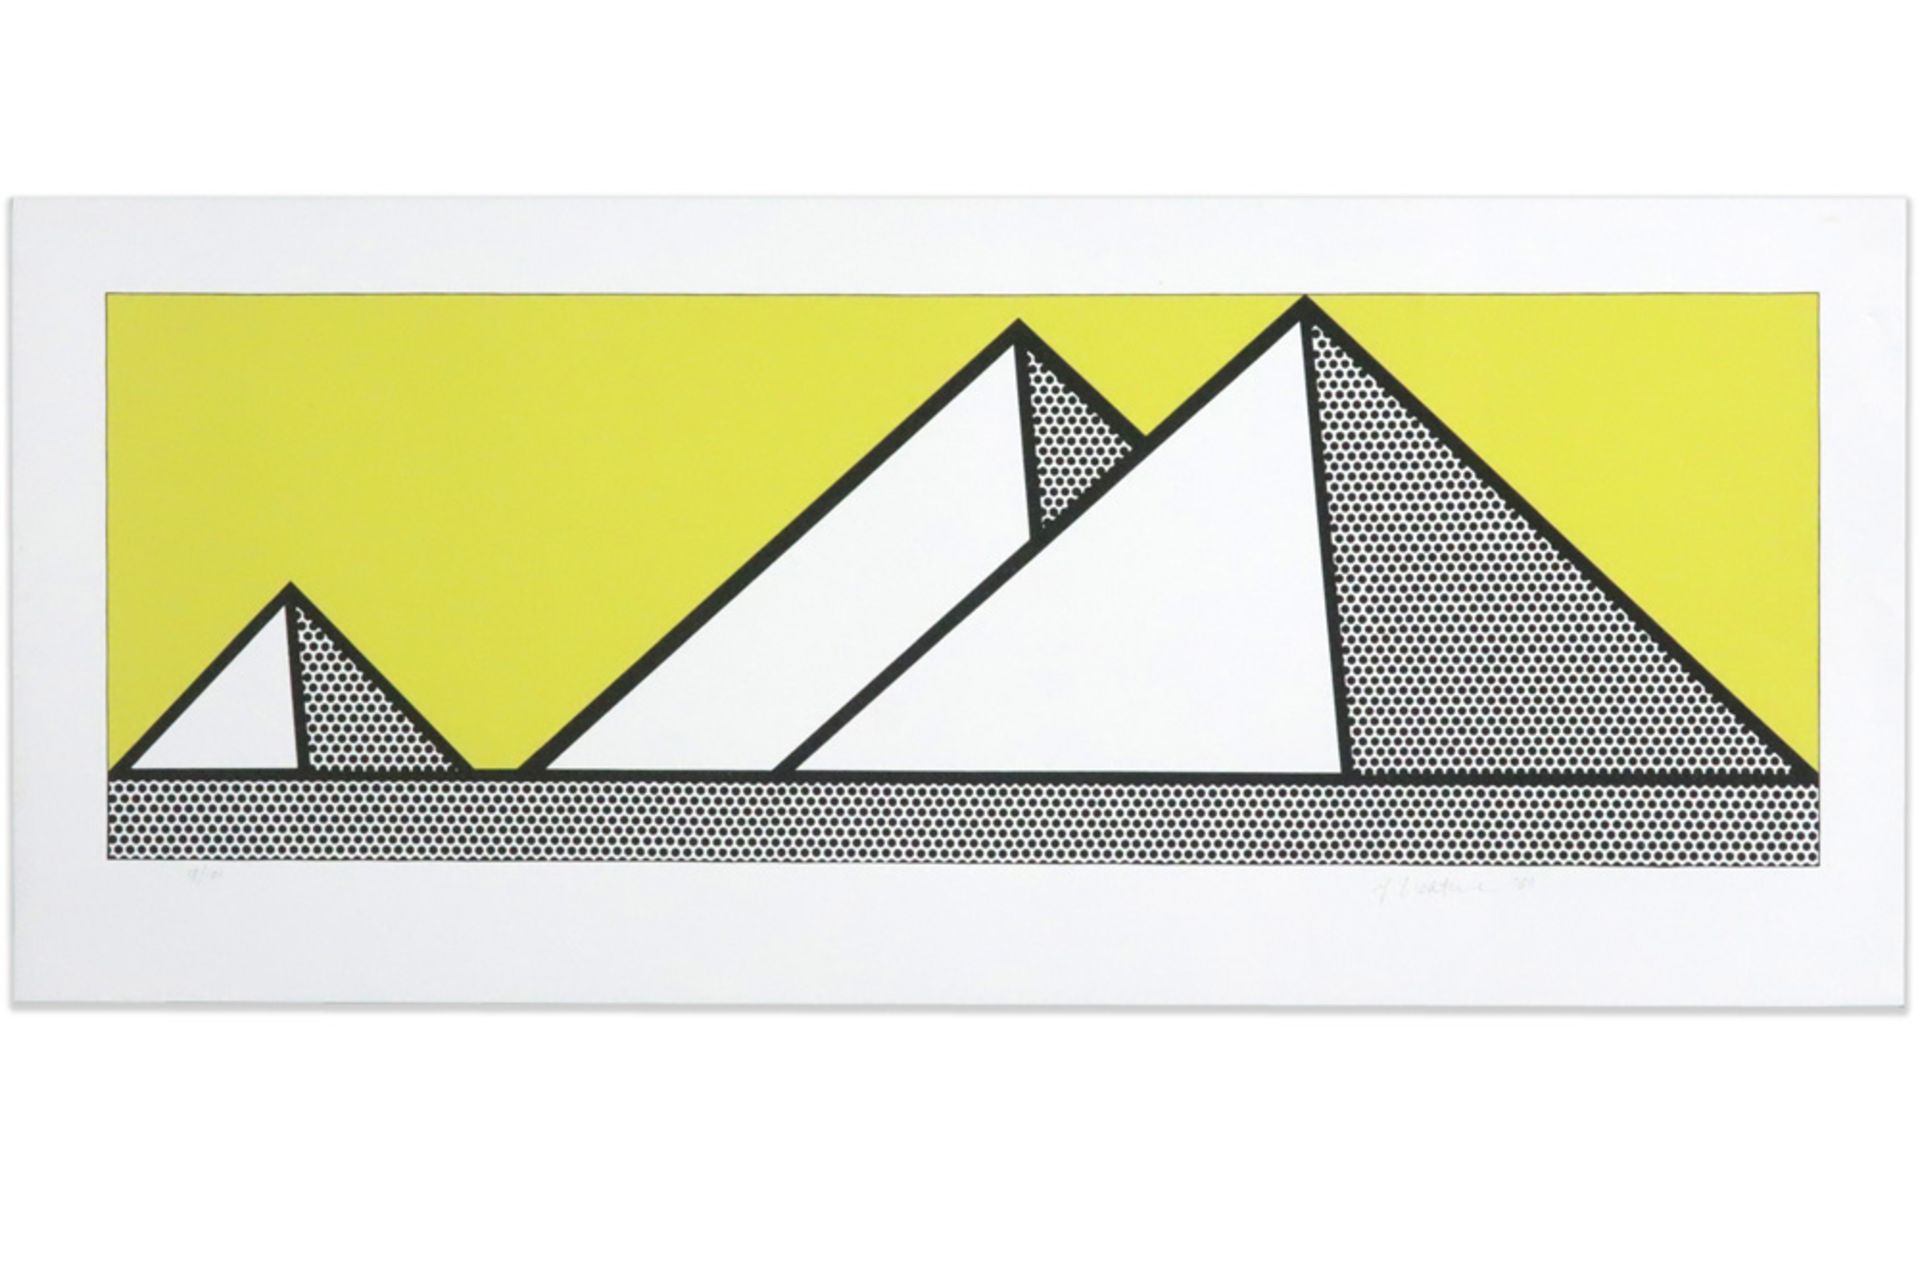 Roy Lichtenstein "Pyramids" lithograph printed in colors on Arches - signed and dated (19)69 ||